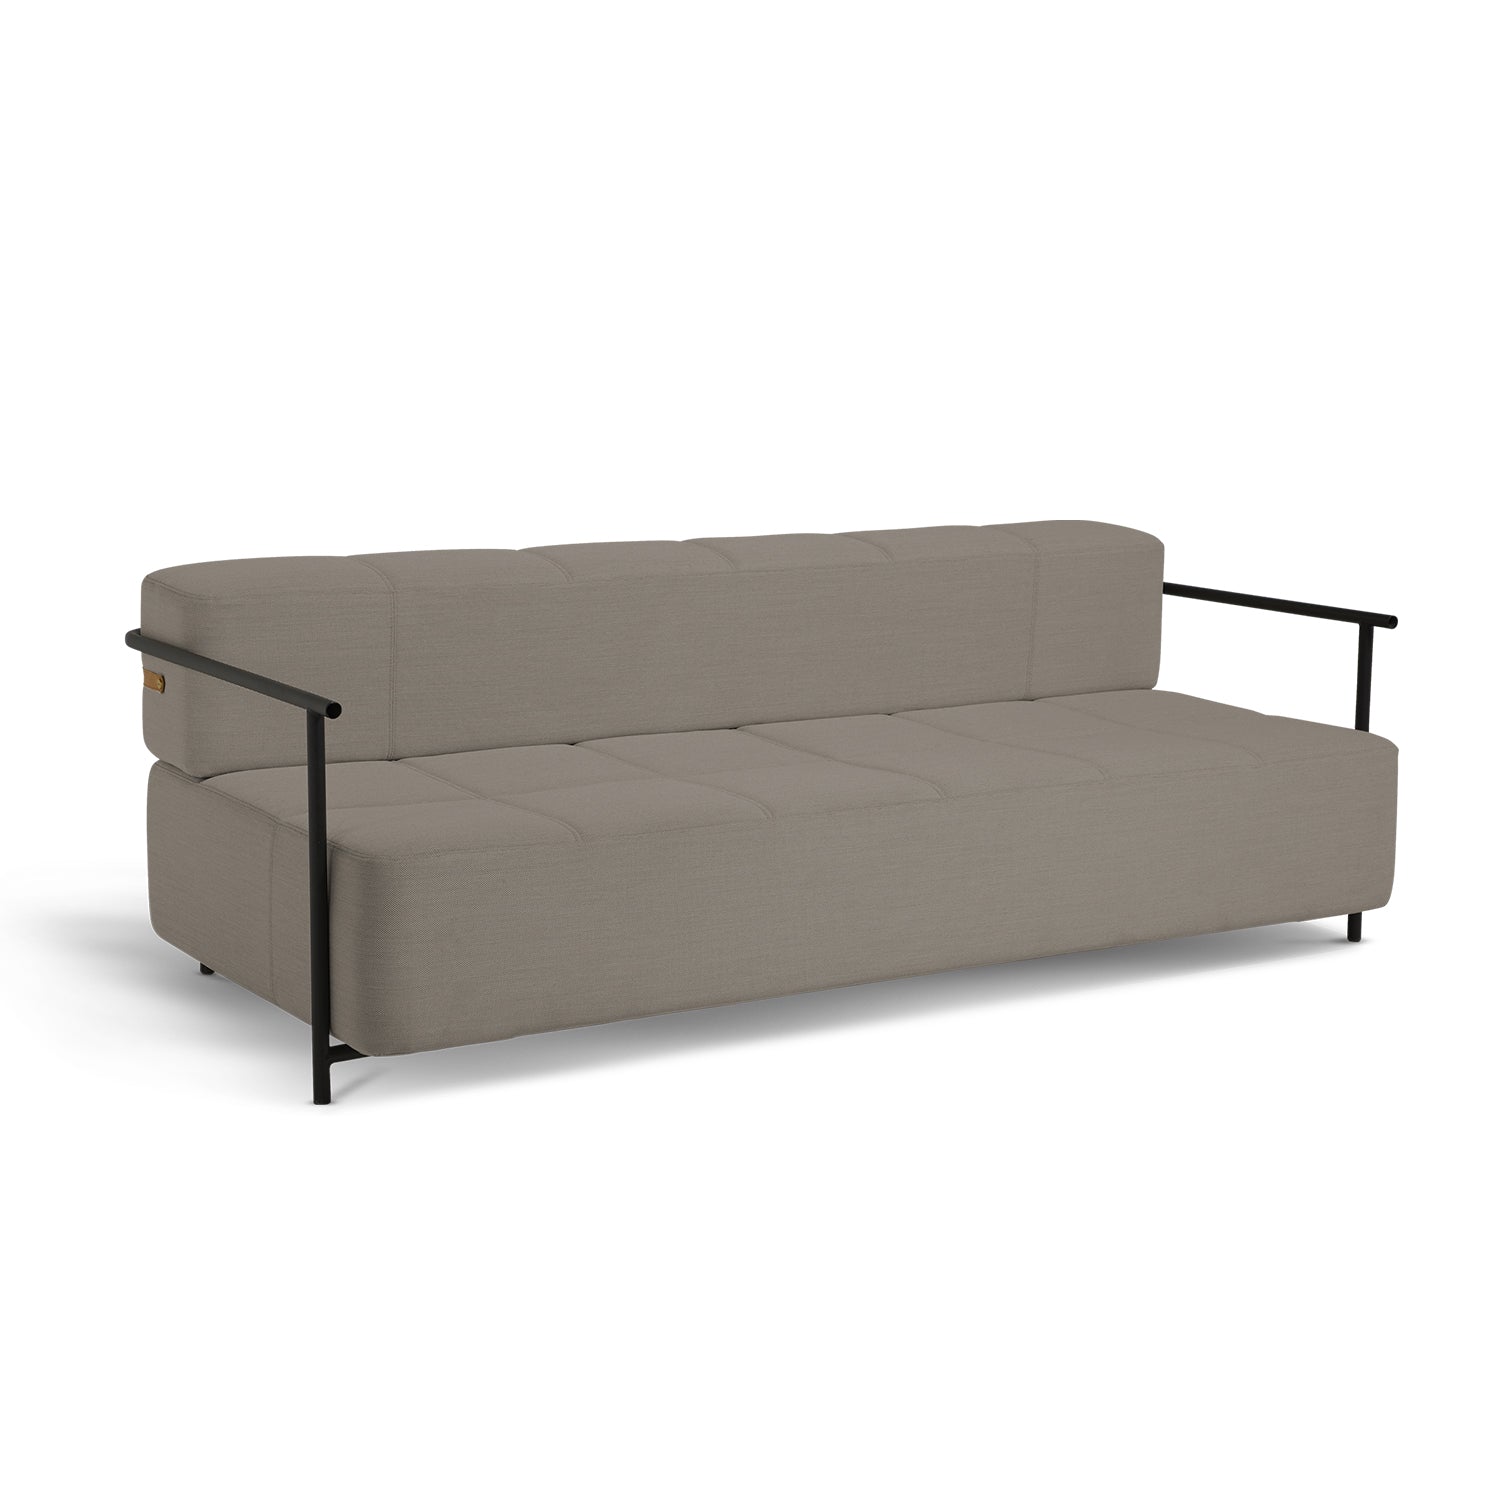 Northern Daybe Sofabed with Armrest in Brown